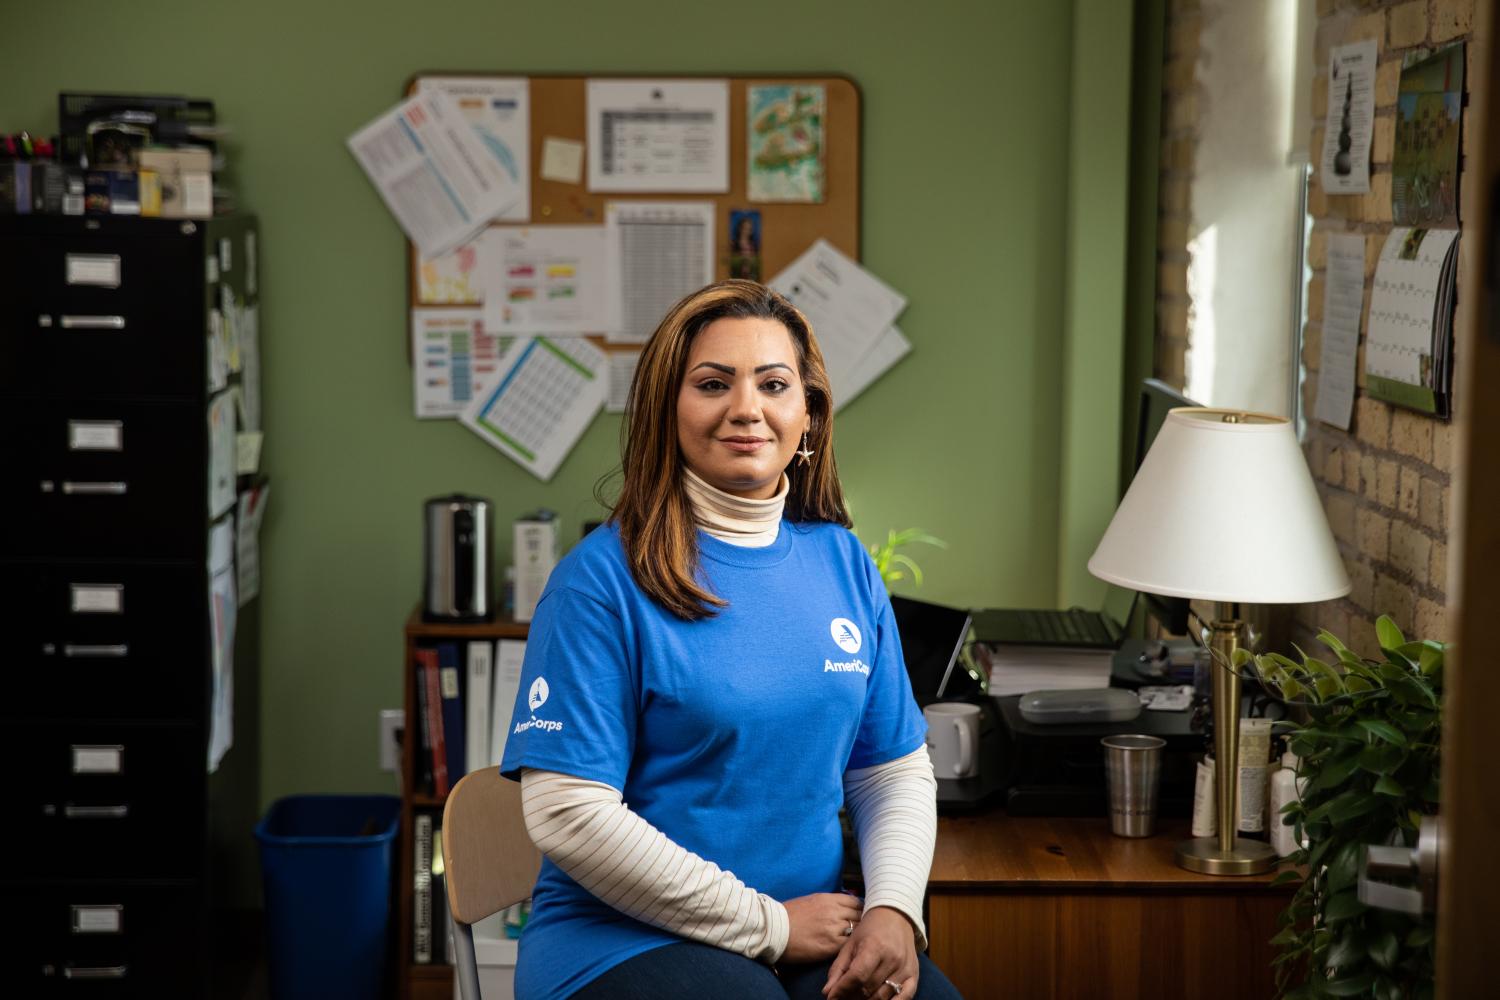 AmeriCorps member smiling in an office